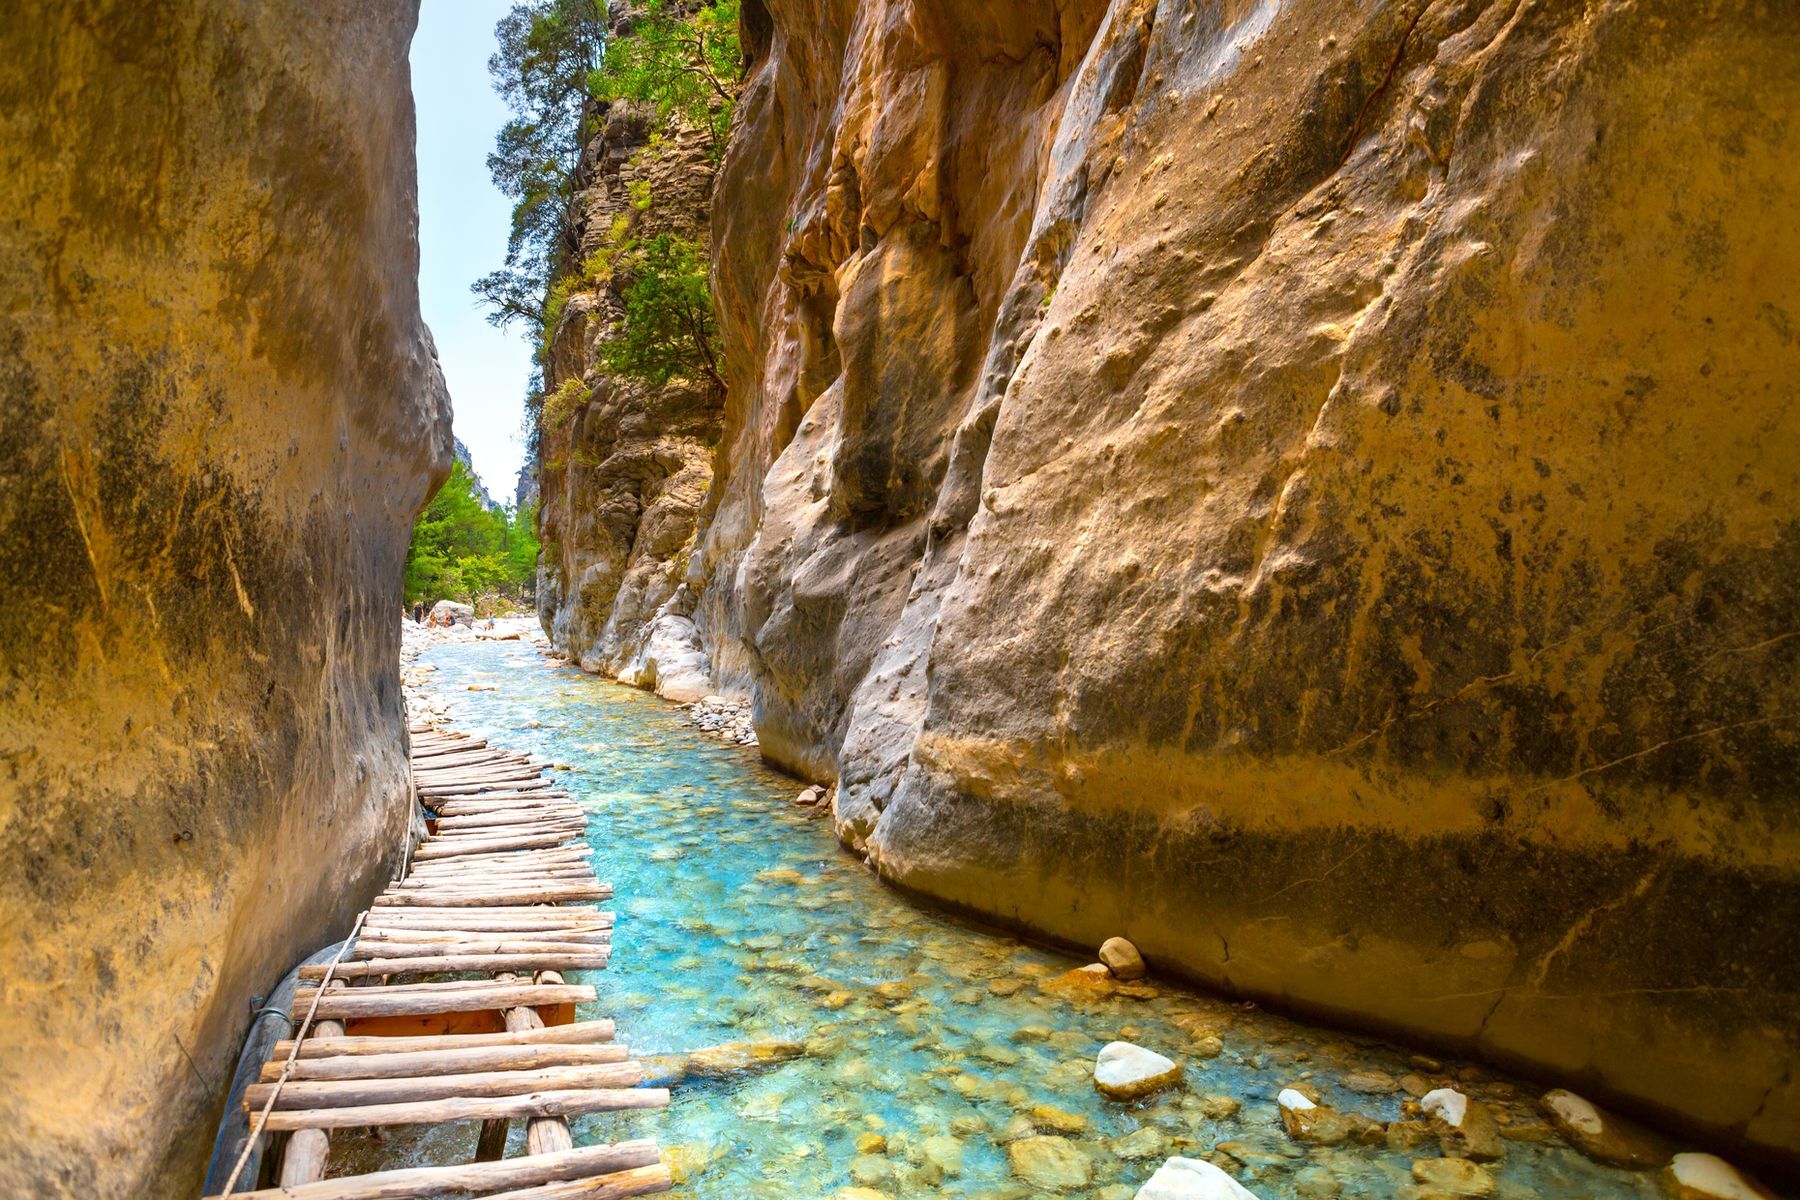 Hiking enthusiasts are in for an unforgettable experience at <a href="https://www.discovergreece.com/experiences/hiking-spectacular-samaria-gorge-chania" rel="noreferrer noopener">Samaria National Park</a> on the island of Crete. Its gorges number among the longest in Europe as they wind through dizzying rock faces with magnificent views of the wilderness. Amid strikingly lush vegetation (from May to October), enjoy unique flora and fauna and marvel at a narrow section called the <a href="https://www.hikingproject.com/gem/859/samaria-gorge-iron-gates" rel="noreferrer noopener">Iron Gates</a>, where the surrounding cliffs draw impressively close to one another.